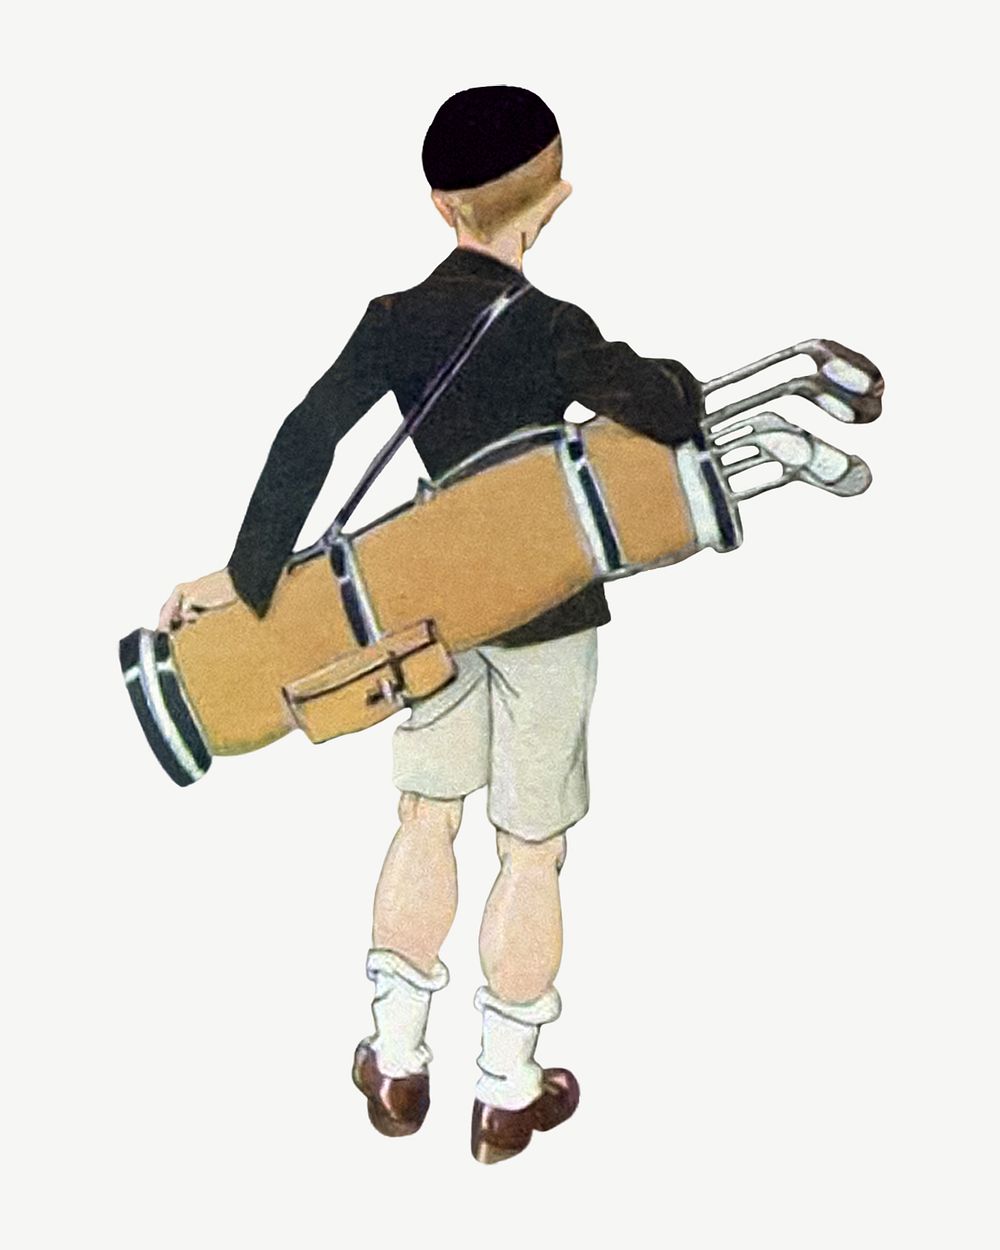 Vintage golf caddy illustration psd. Remixed by rawpixel. 